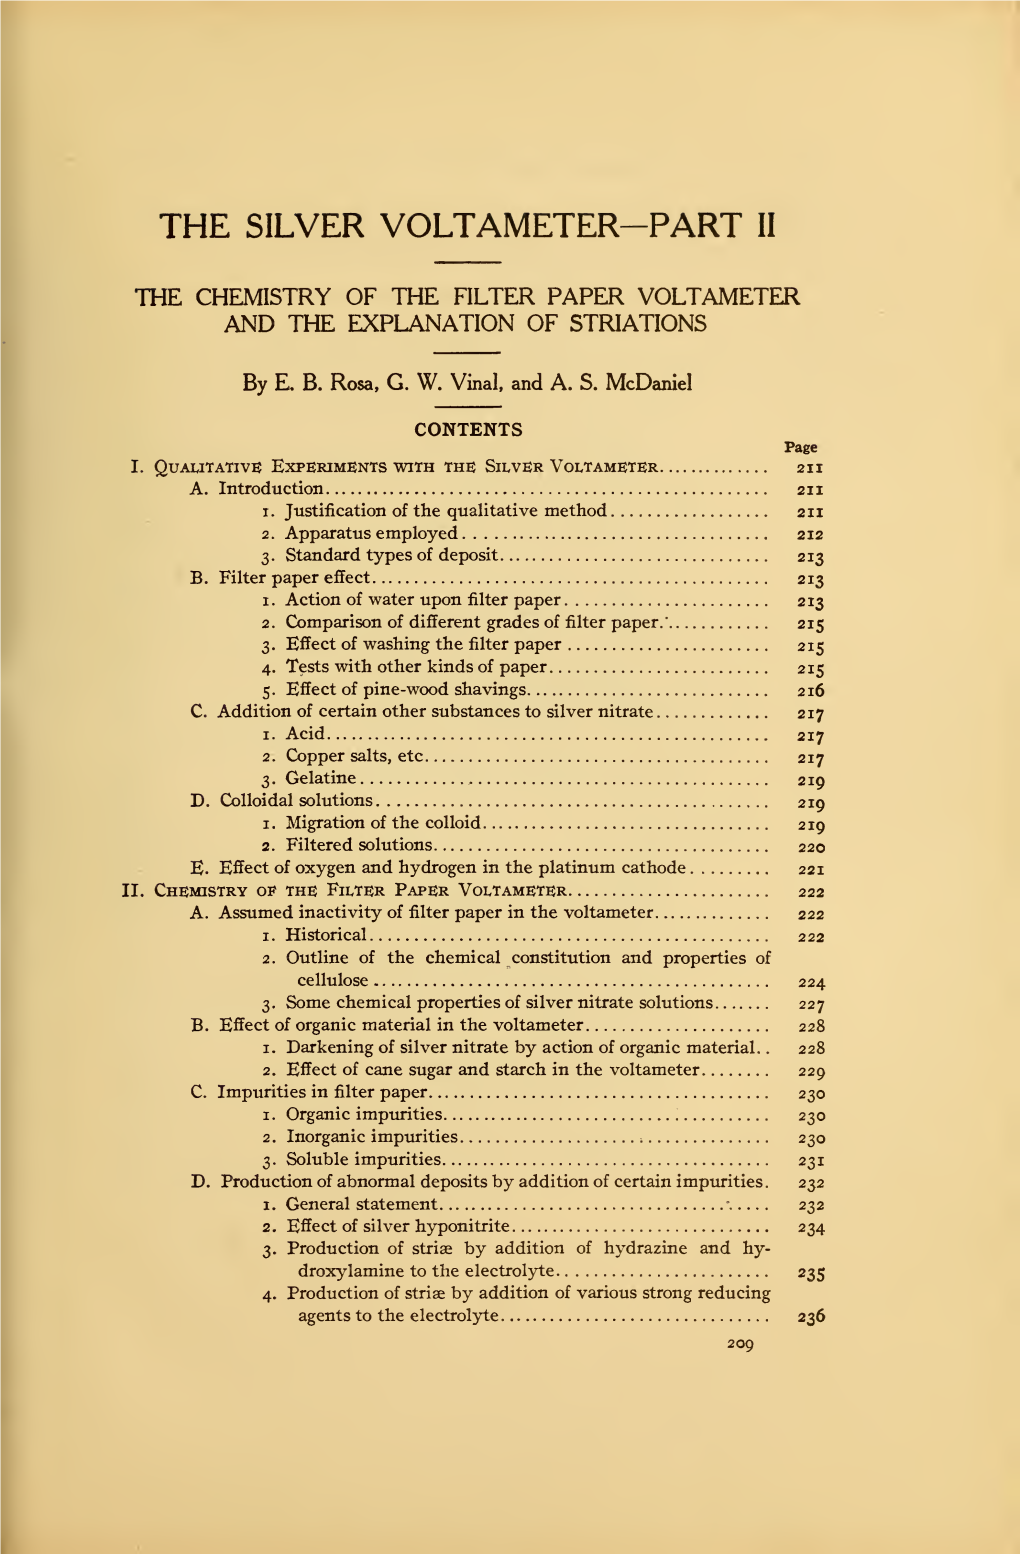 Part II. the Chemistry of the Filter Paper Voltameter and The